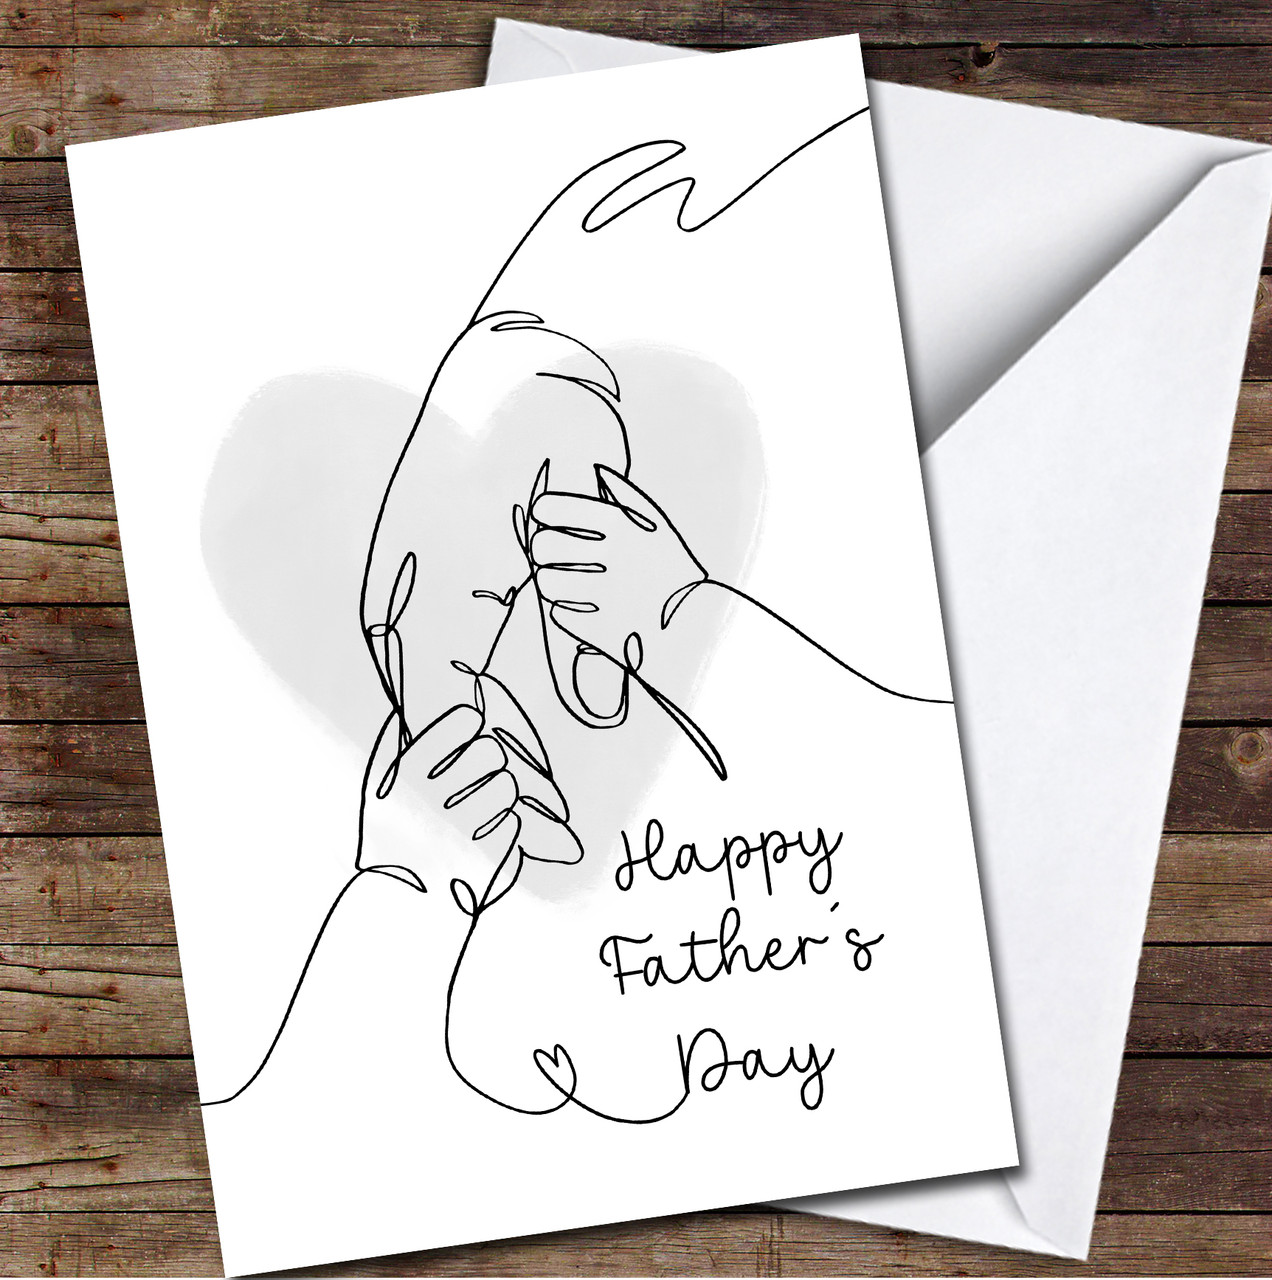 Fathers Day Gifts: Reasons Why We Love You: Unique book for dad from kids  and wife. Simple prompts, pages for coloring or drawing. Easy to create by  ... Father's Day gift from